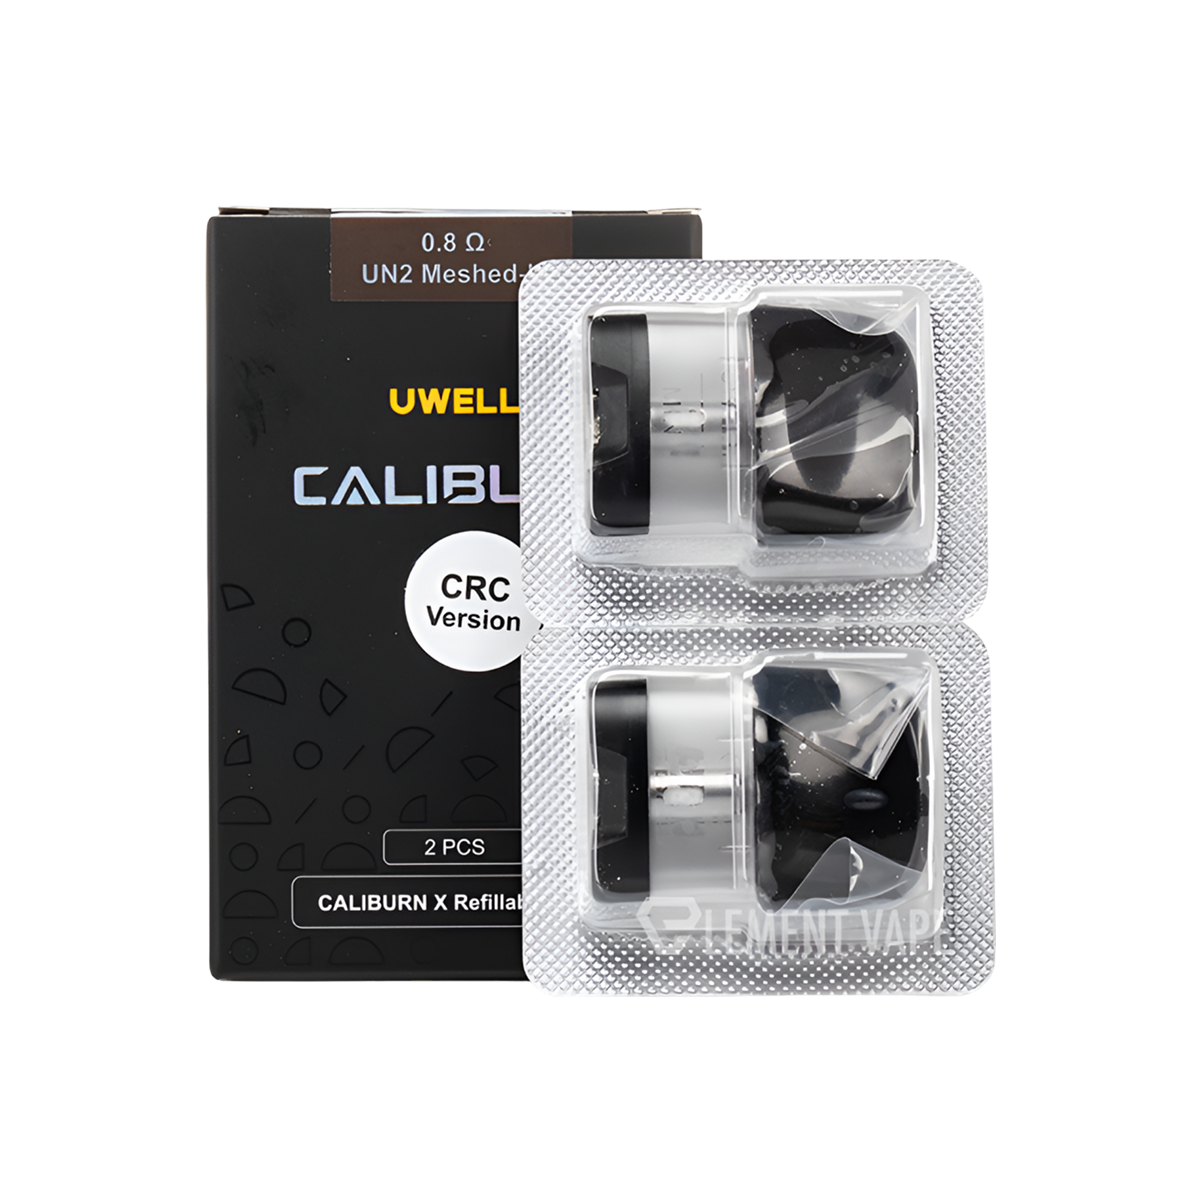 Uwell Caliburn X Replacement Pod Cartridge FeCrAl UN2 Meshed-H Coil - 0.8 Ω  